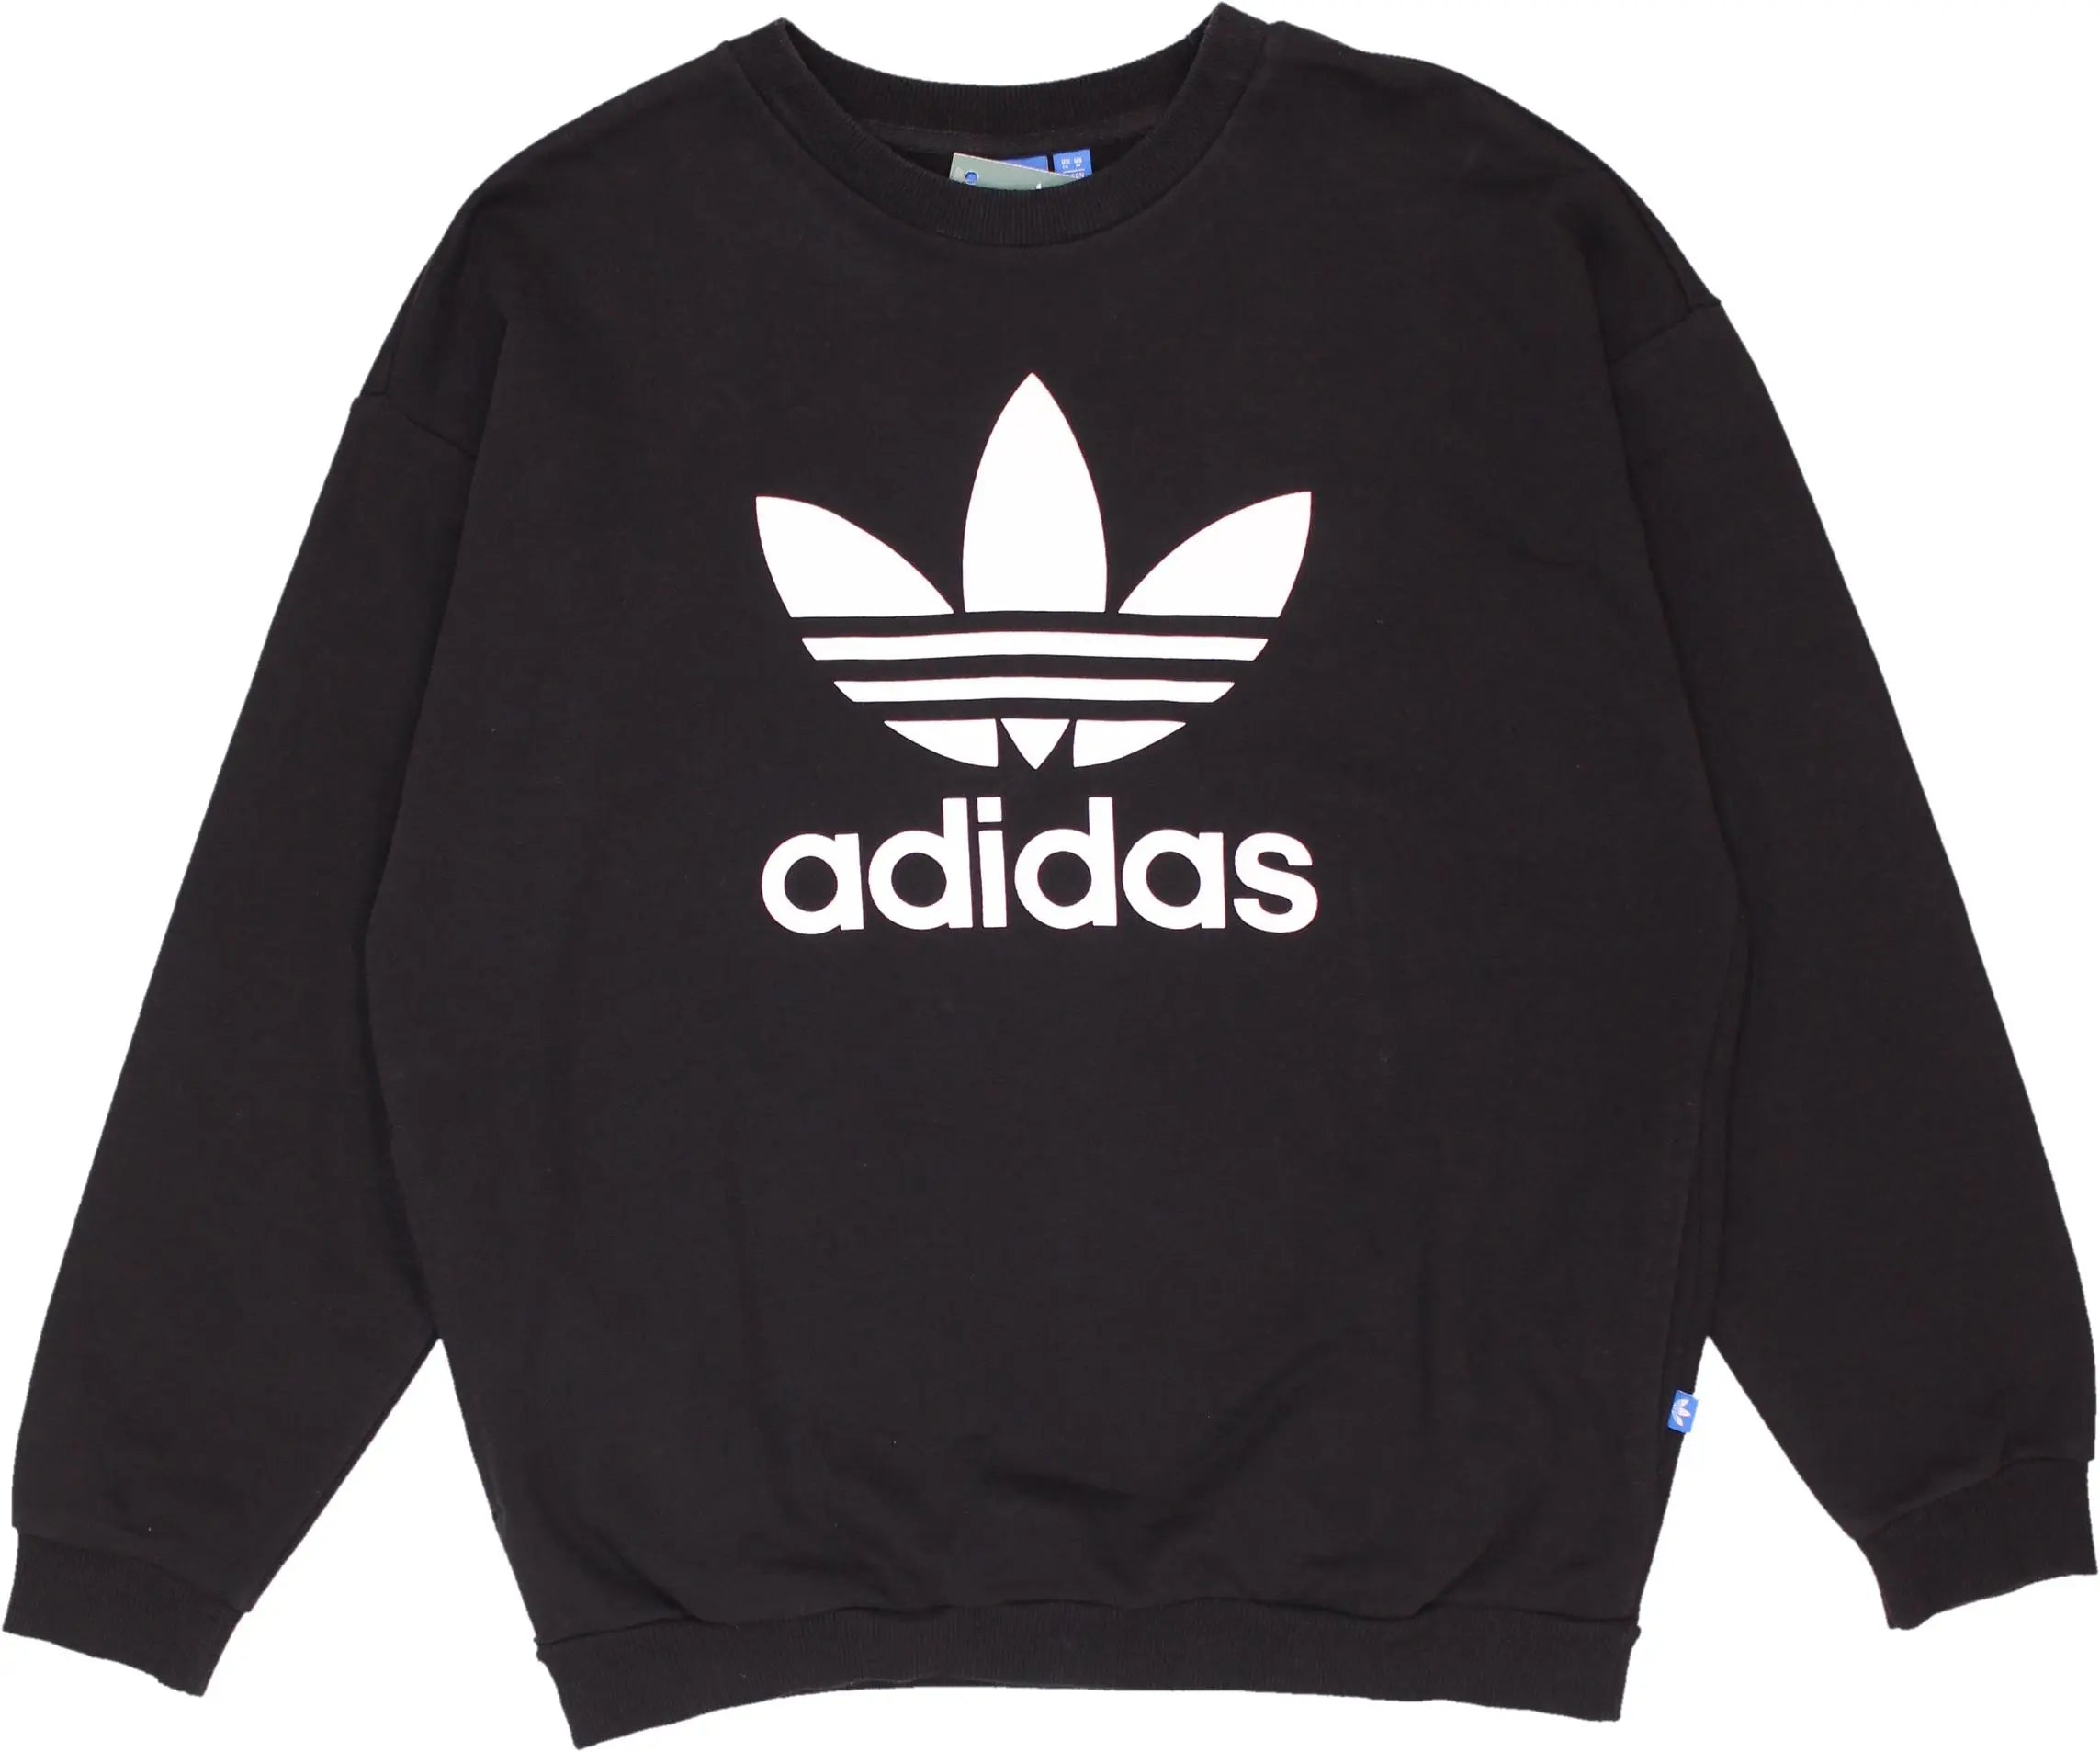 Adidas - Black Adidas Jumper- ThriftTale.com - Vintage and second handclothing